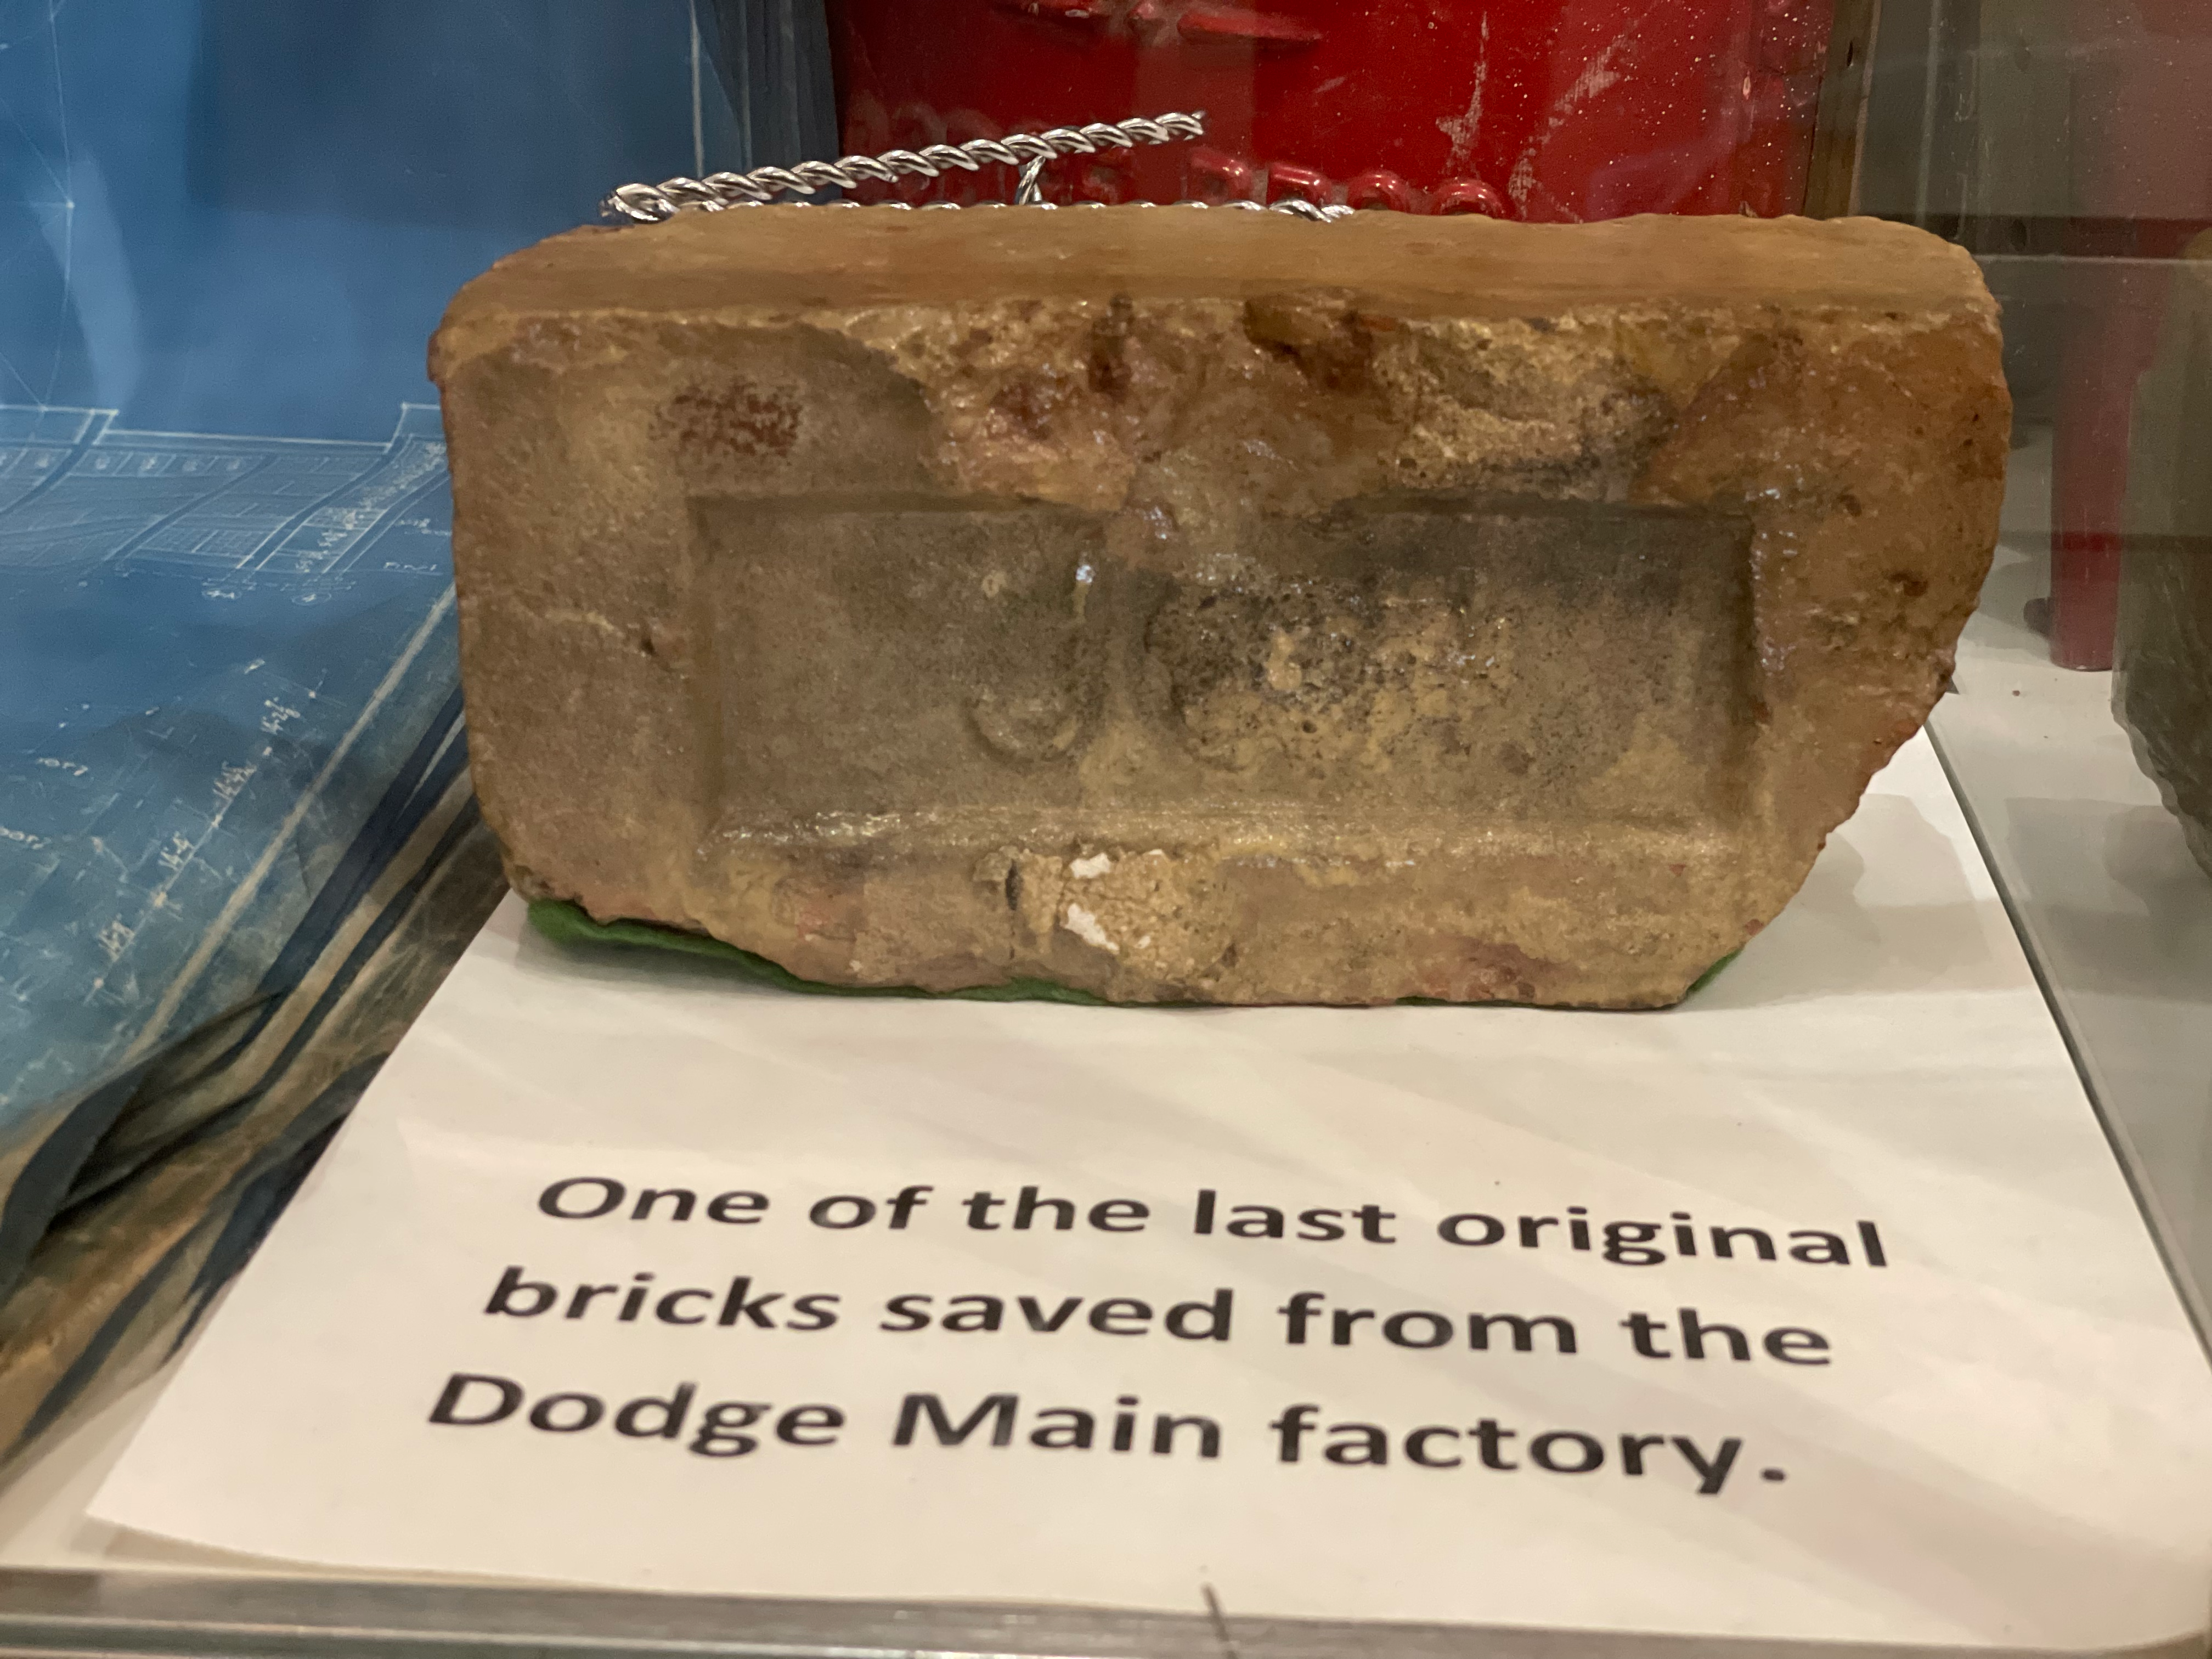 One of the final bricks removed from Dodge Main Factory in Poletown Detroit